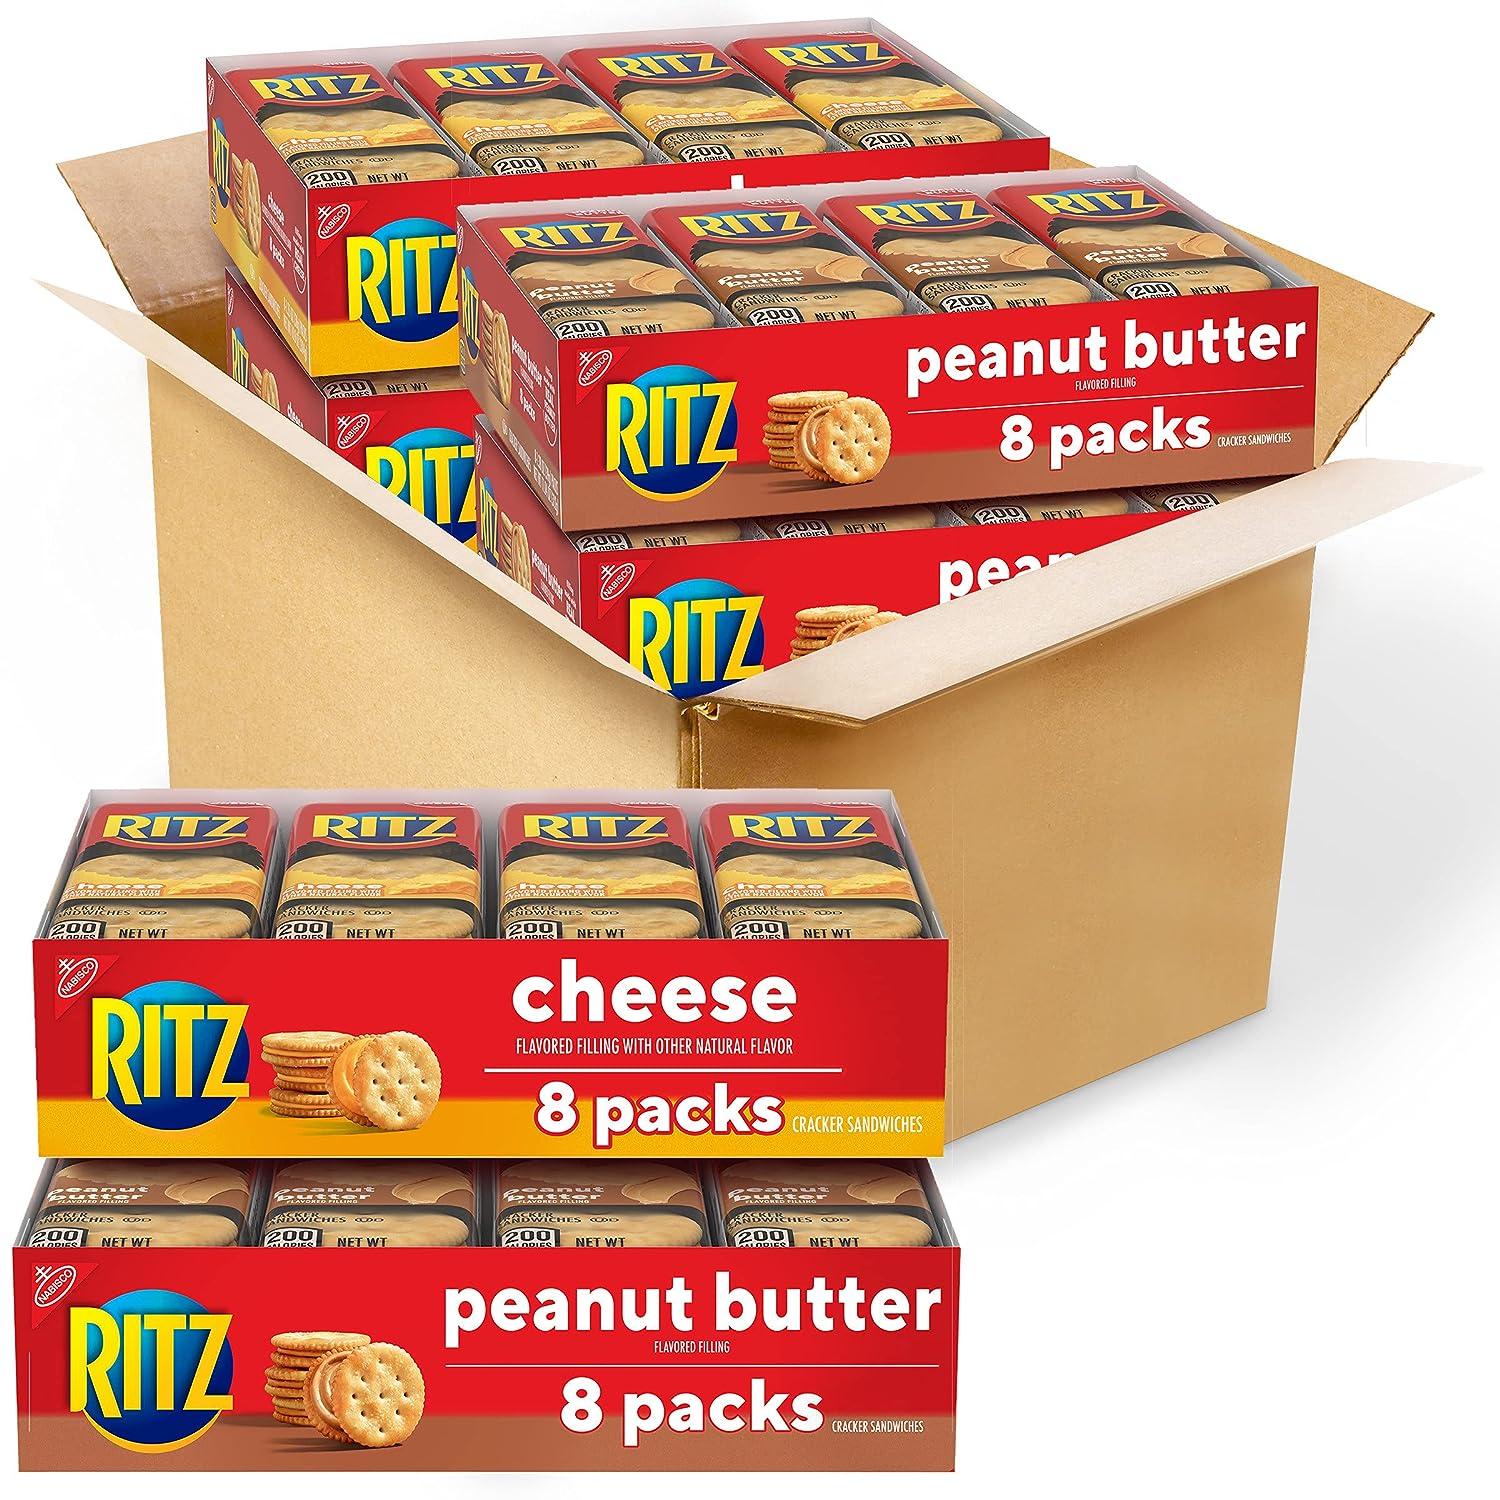 Ritz Cheese Peanut Butter Sandwich Crackers Variety Pack 32-Pack for $12.44 Shipped